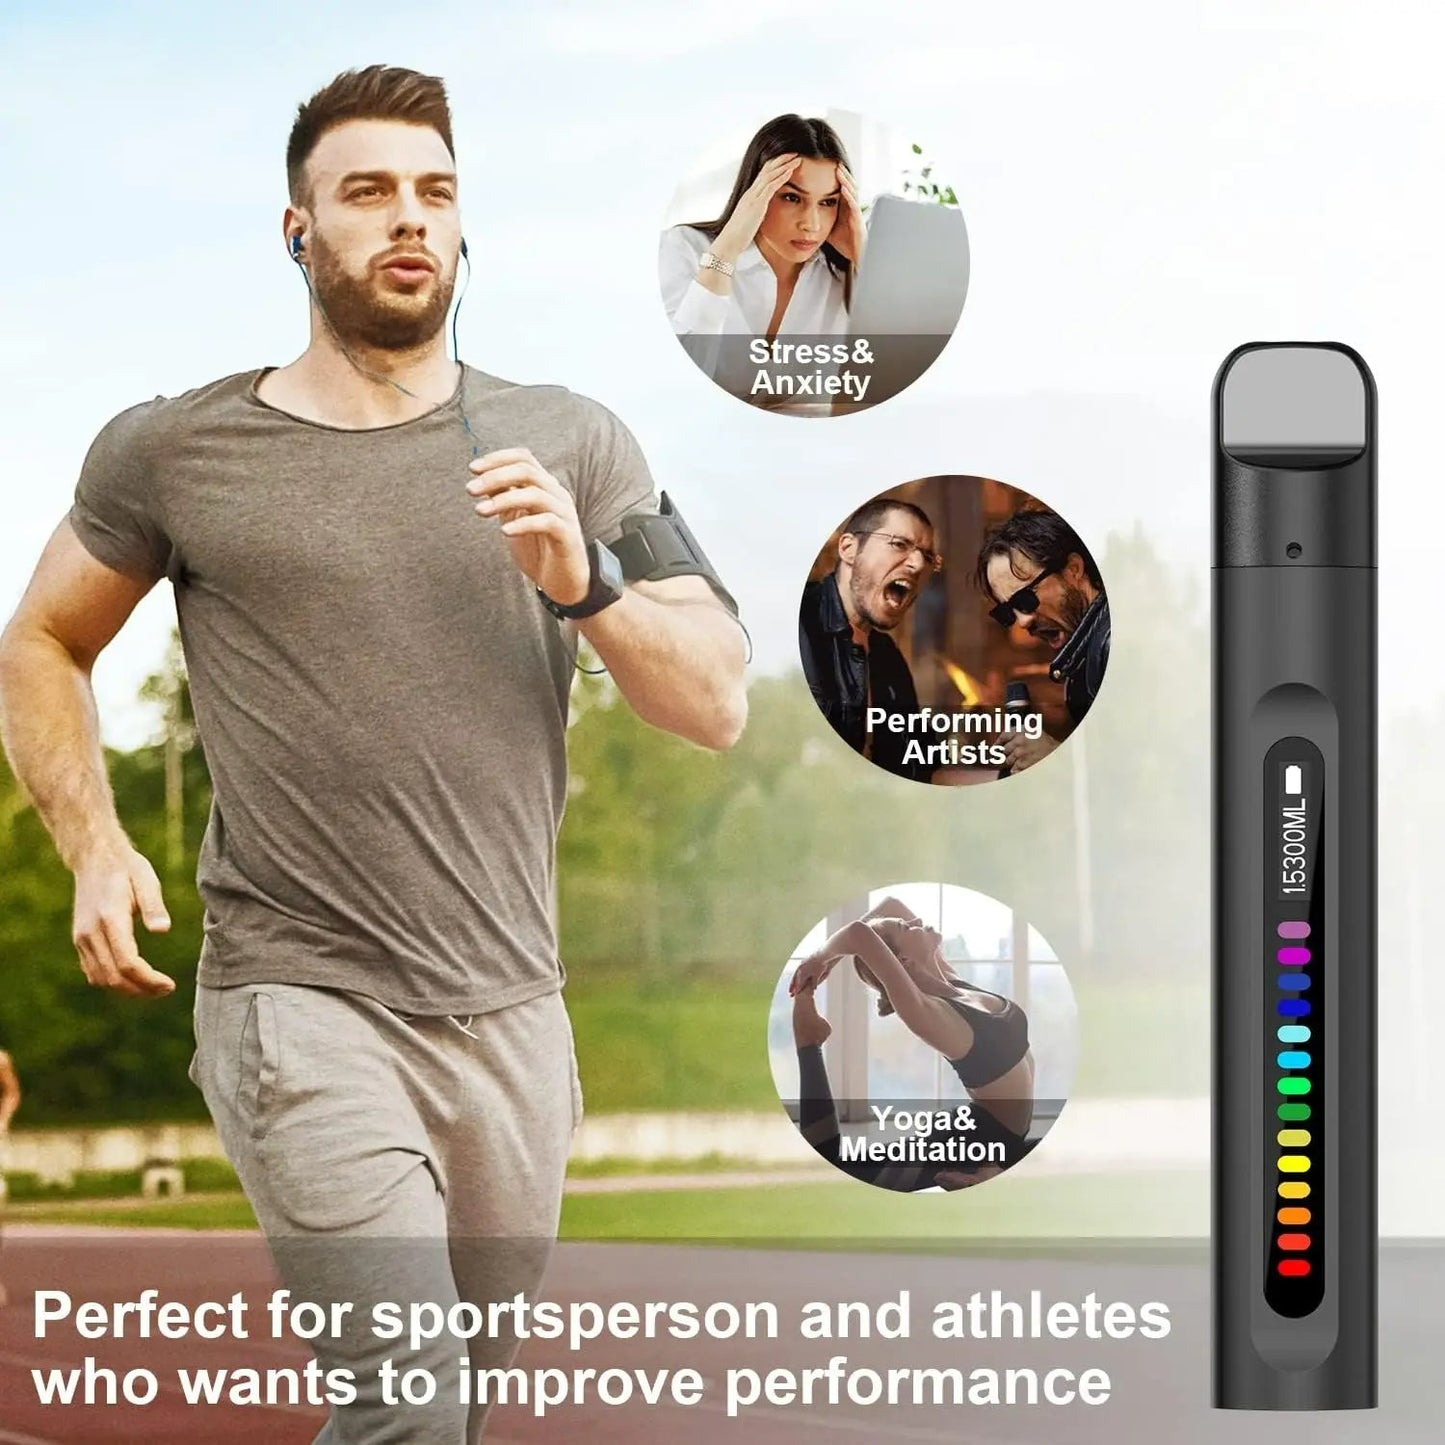 Smart Breathing Trainer -  Respiratory Muscle Training for Better Breathe, Guided Assistant for Athletes